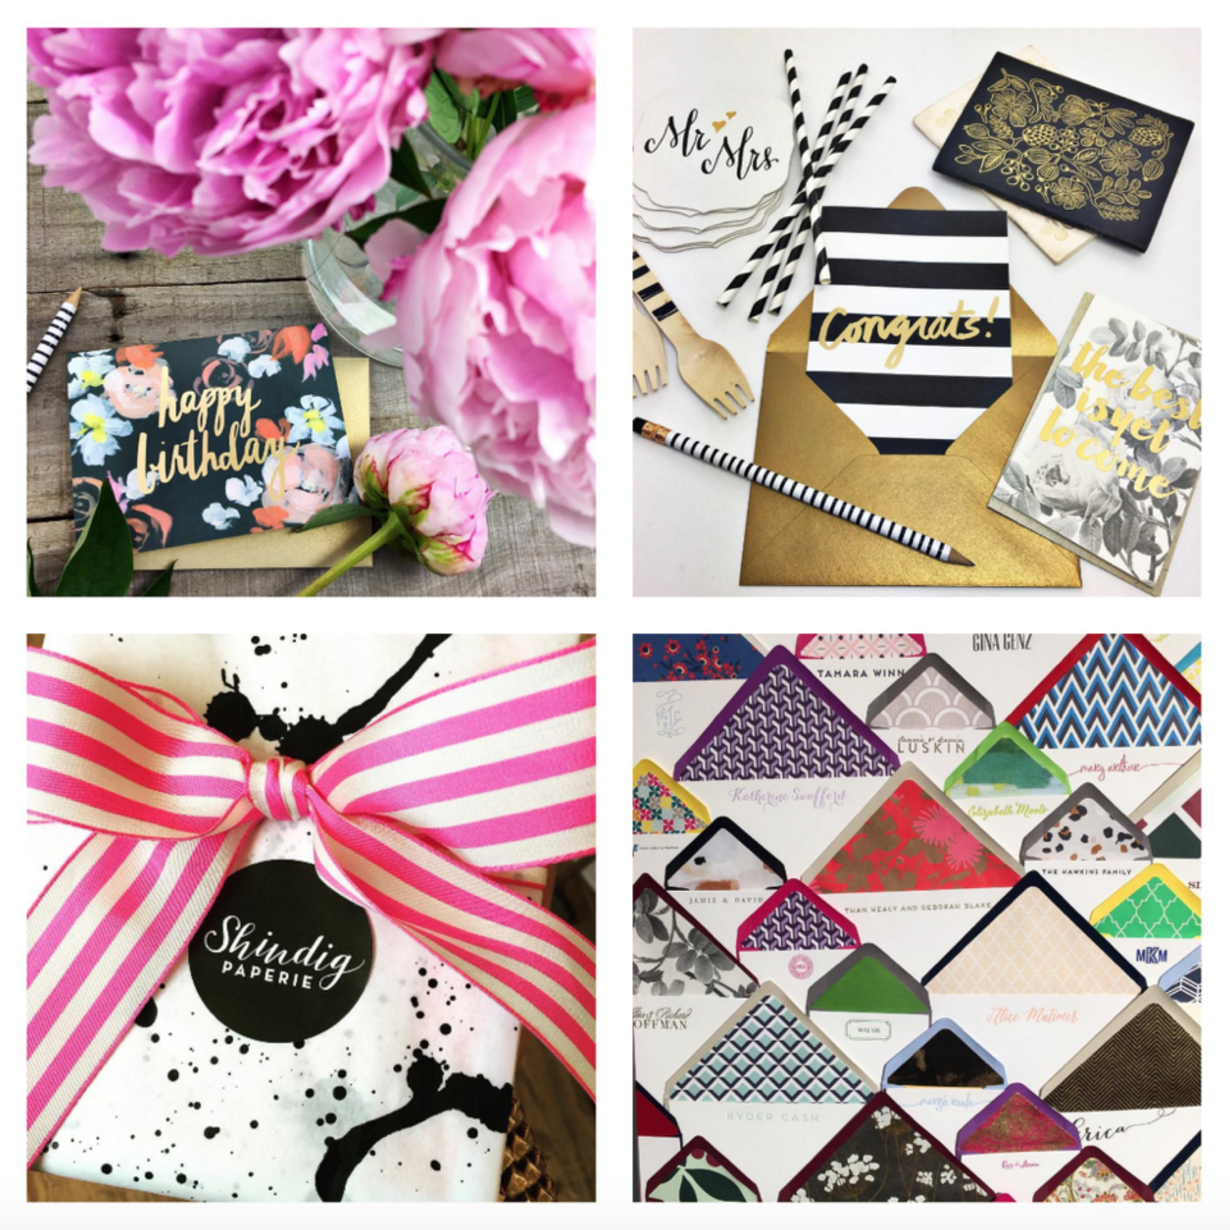 The Business of Stationery / Shindig Paperie via Oh So Beautiful Paper